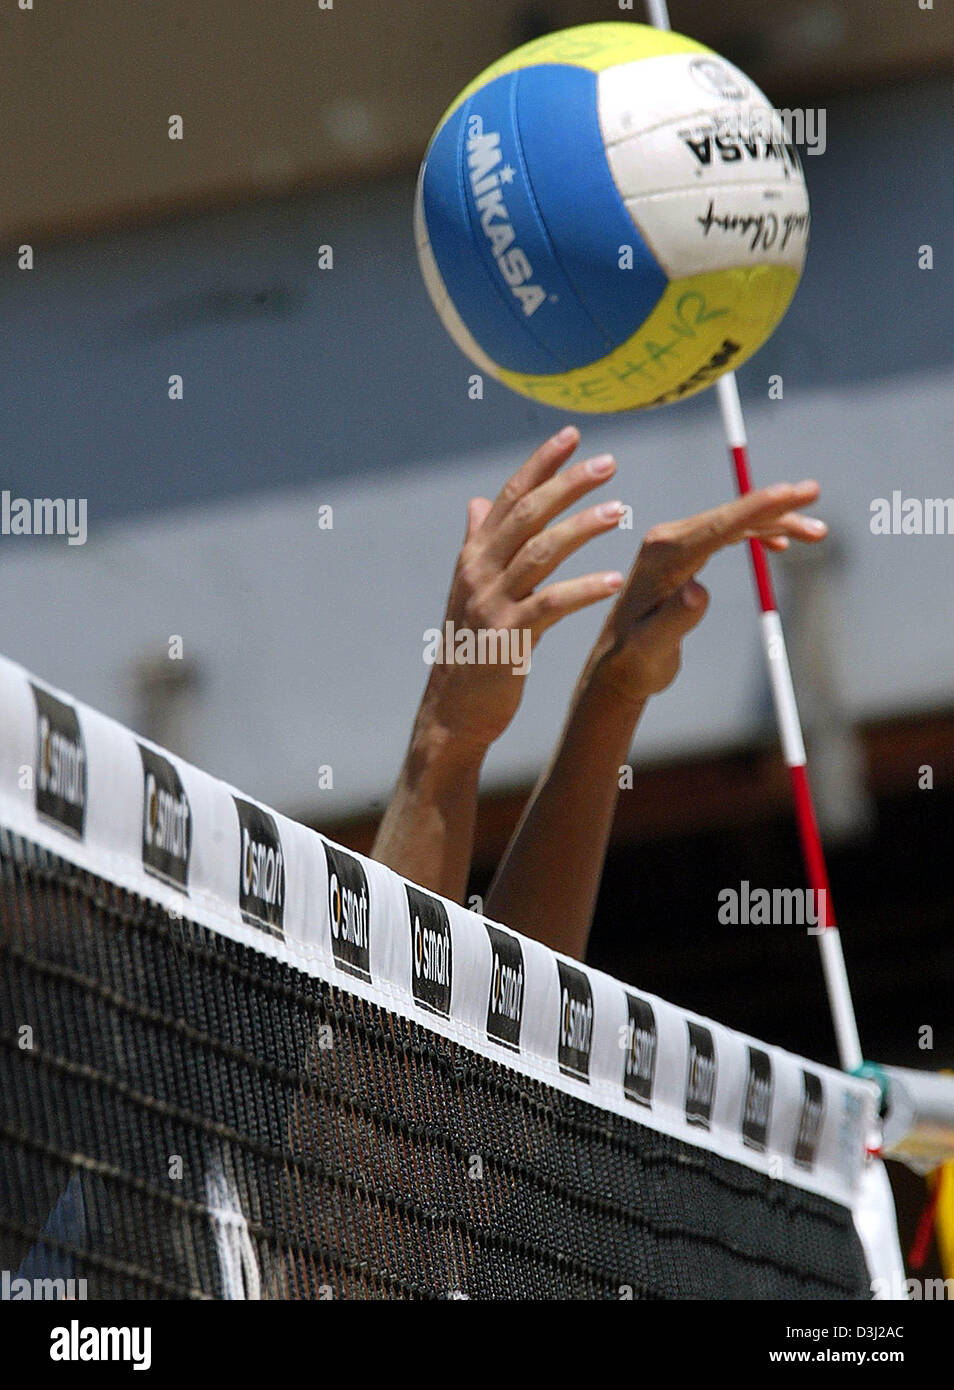 (dpa) - The picture shows a player's hand over the net of a volleyball field at the Schlossplatz in Berlin, Monday 20 June 2005. From Thursday 21th June to 26 June 2005 the best beach volleyball teams from all over the world will compete for the beach volleyball world champion titel on finest sand. Stock Photo